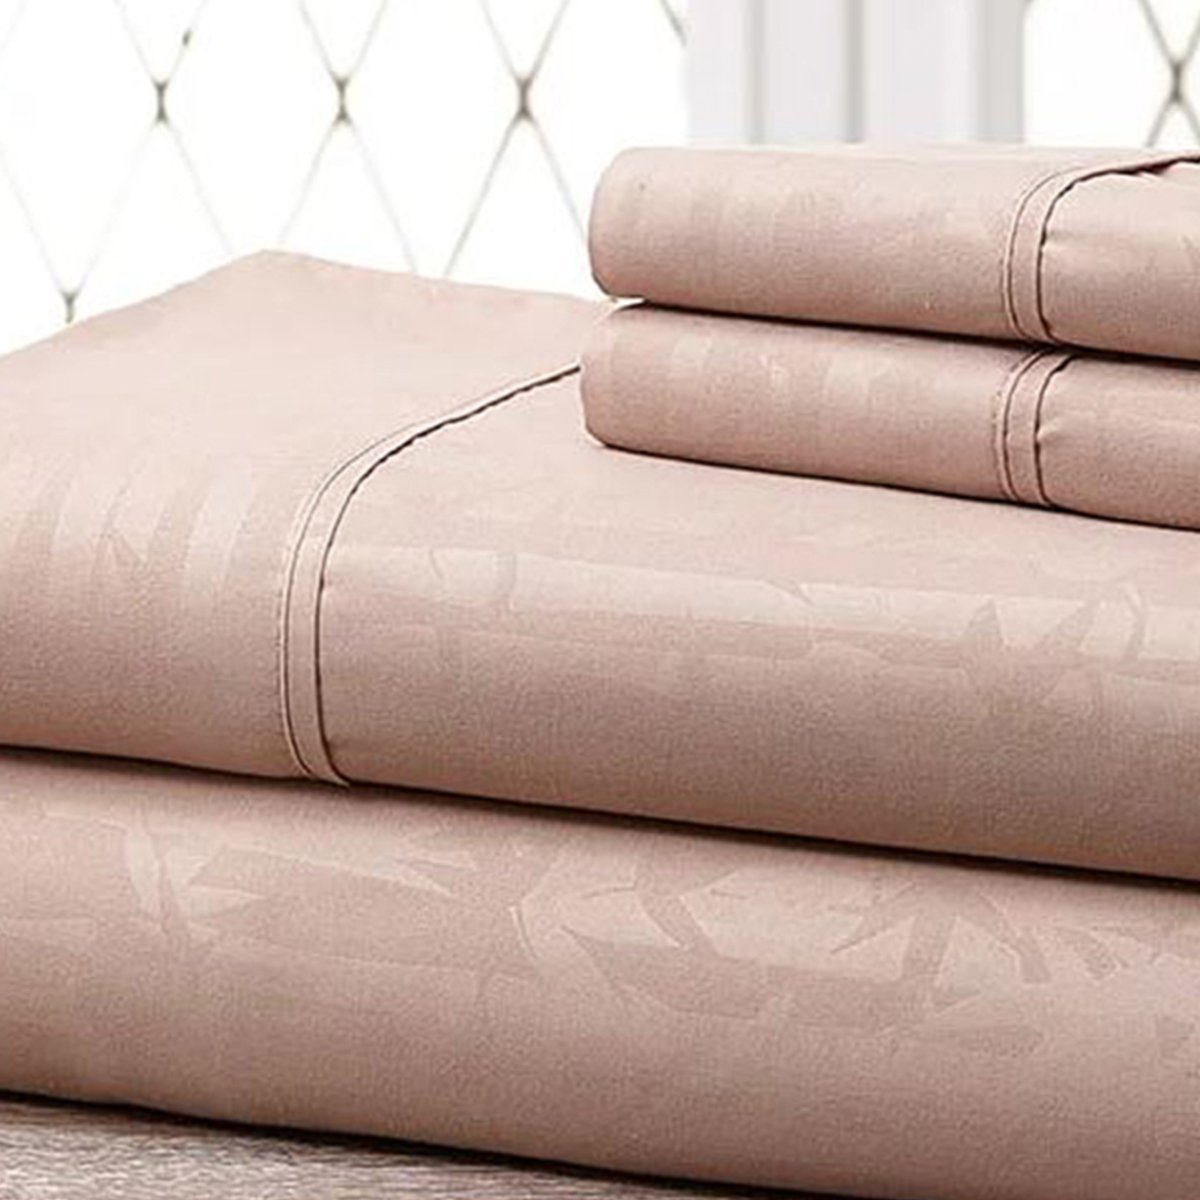 Super-soft 1600 Series Bamboo Embossed Bed Sheet, Champagne - King, 4 Piece